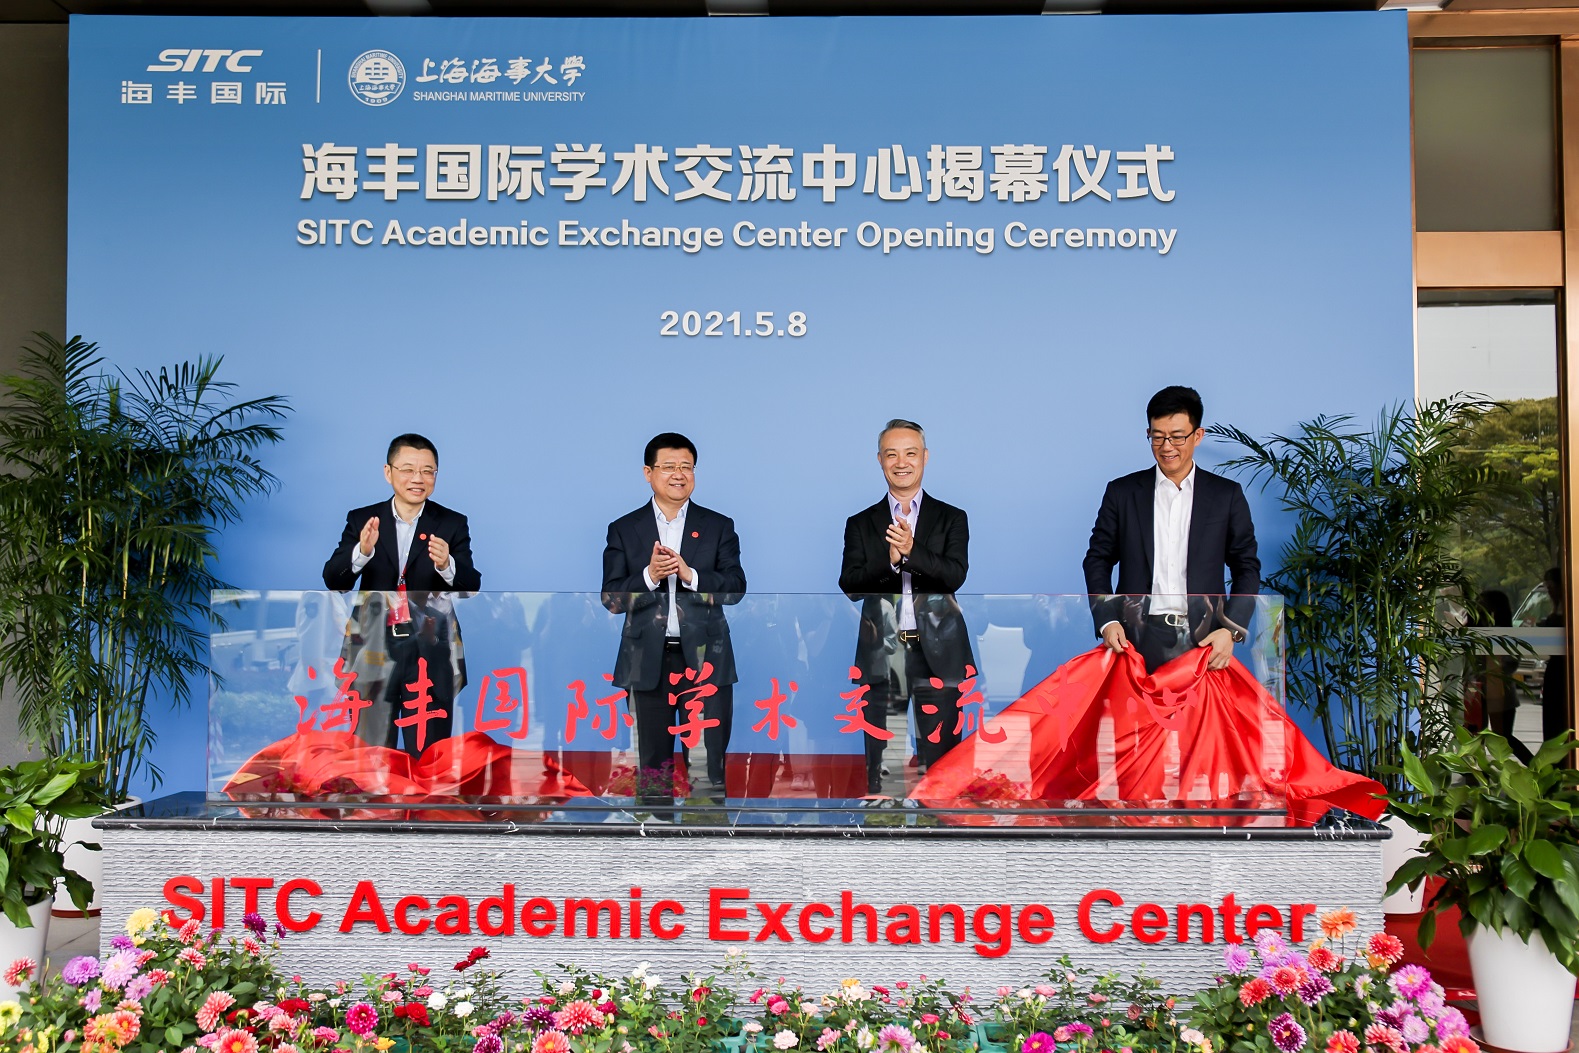 The opening ceremony of SITC International Academic Exchange Center was successfully held